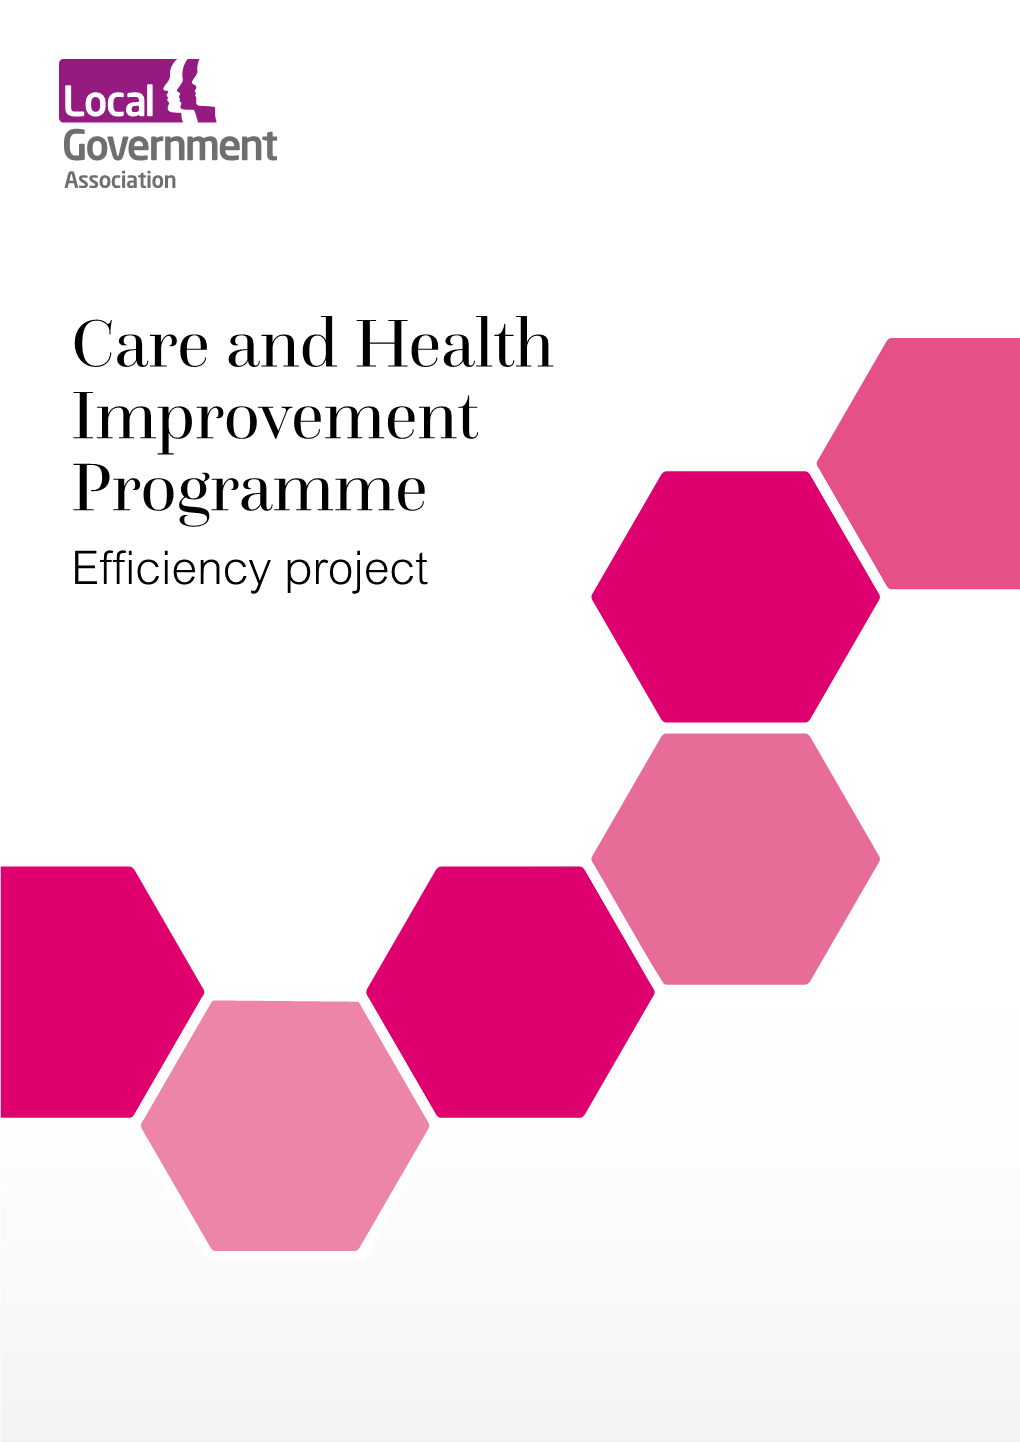 Care and Health Improvement Programme Efficiency Project